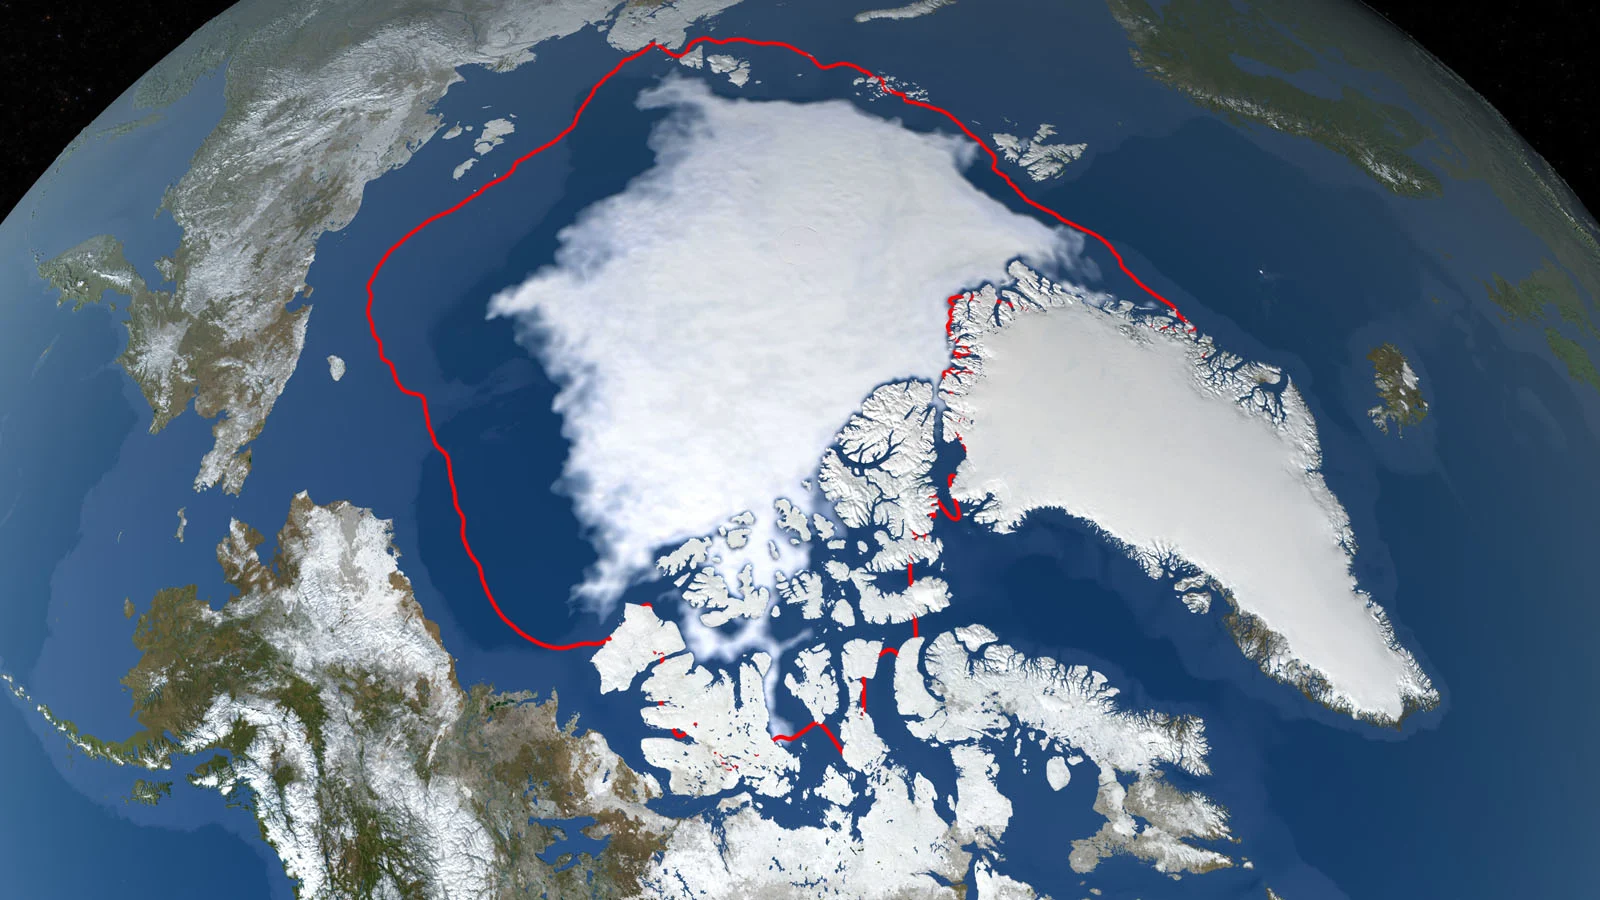 Arctic sea ice ties for 2nd smallest summer minimum on record